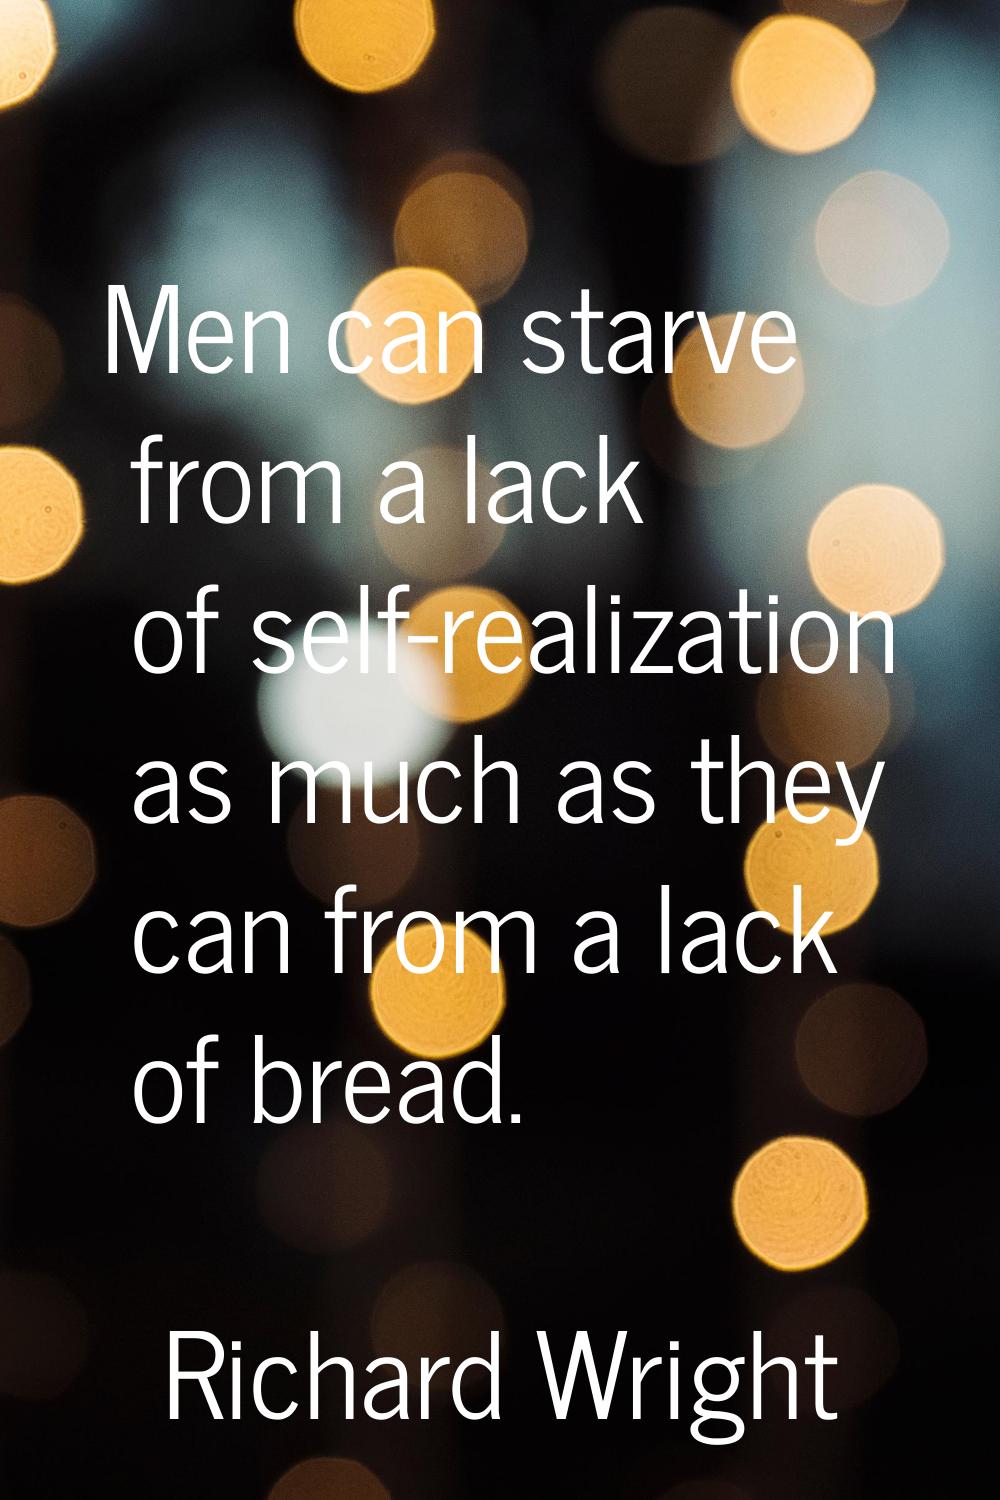 Men can starve from a lack of self-realization as much as they can from a lack of bread.